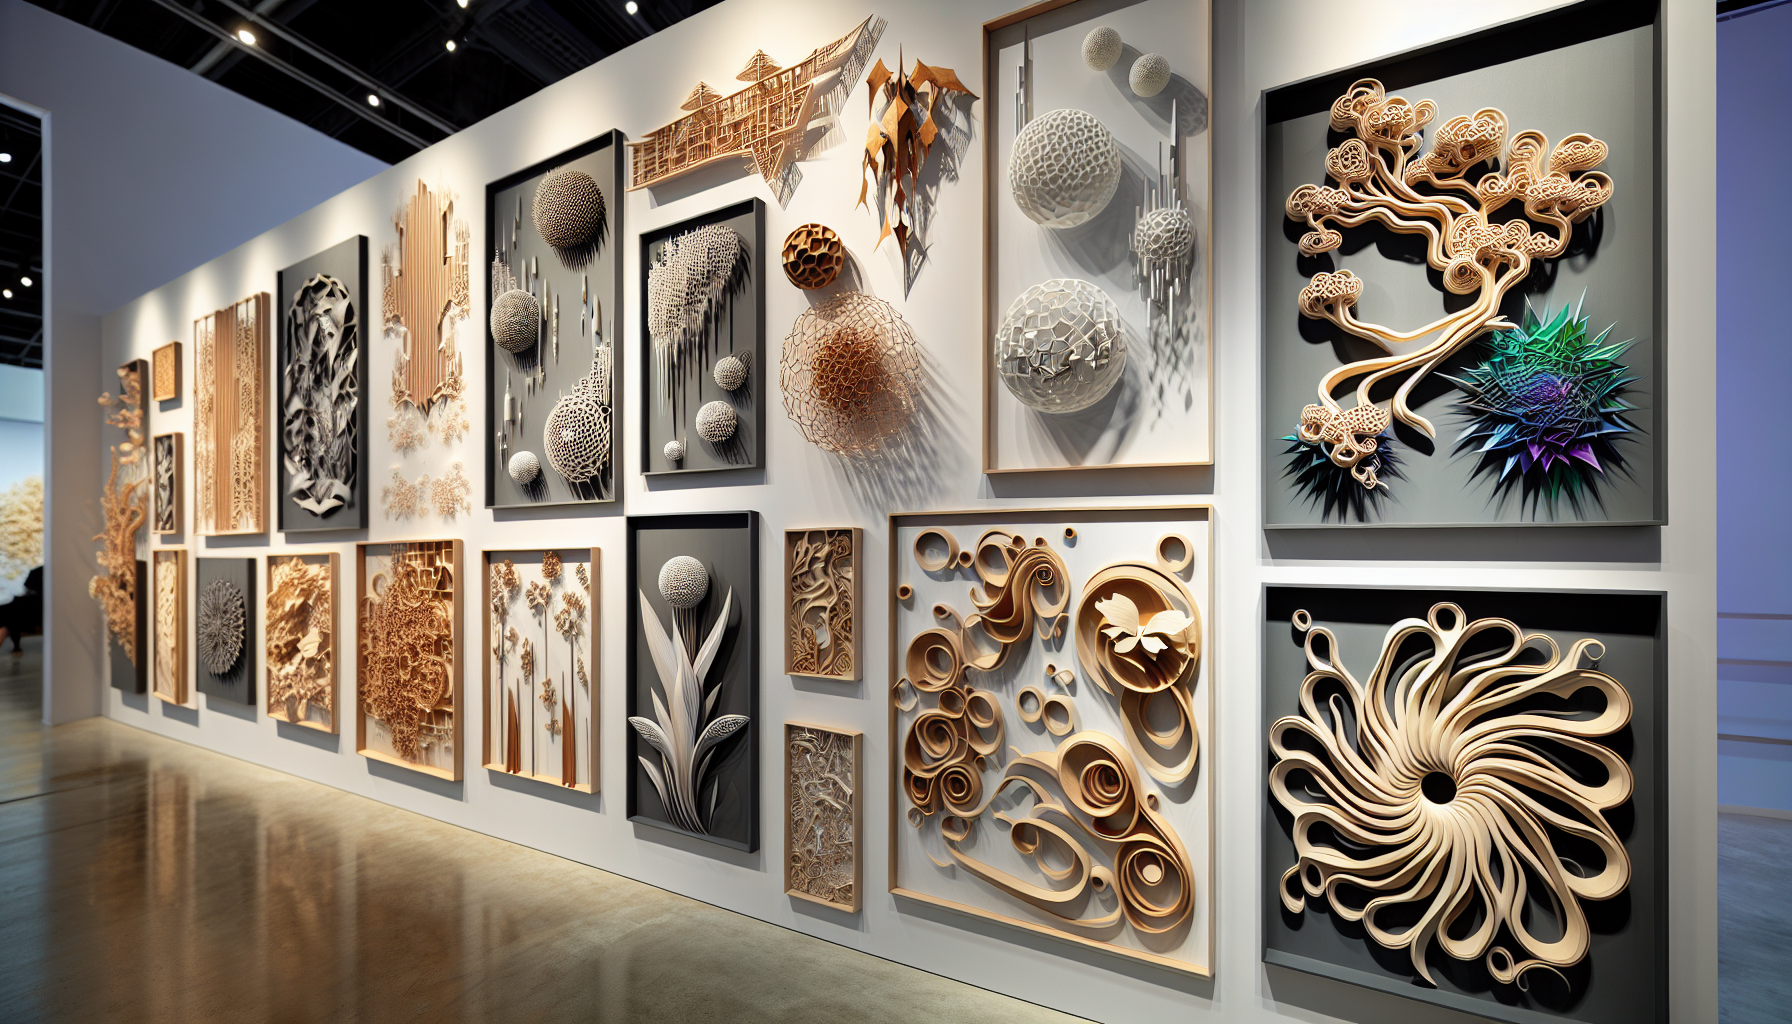 Variety of 3D wall art options including wood panels, metal sculptures, and papercraft art